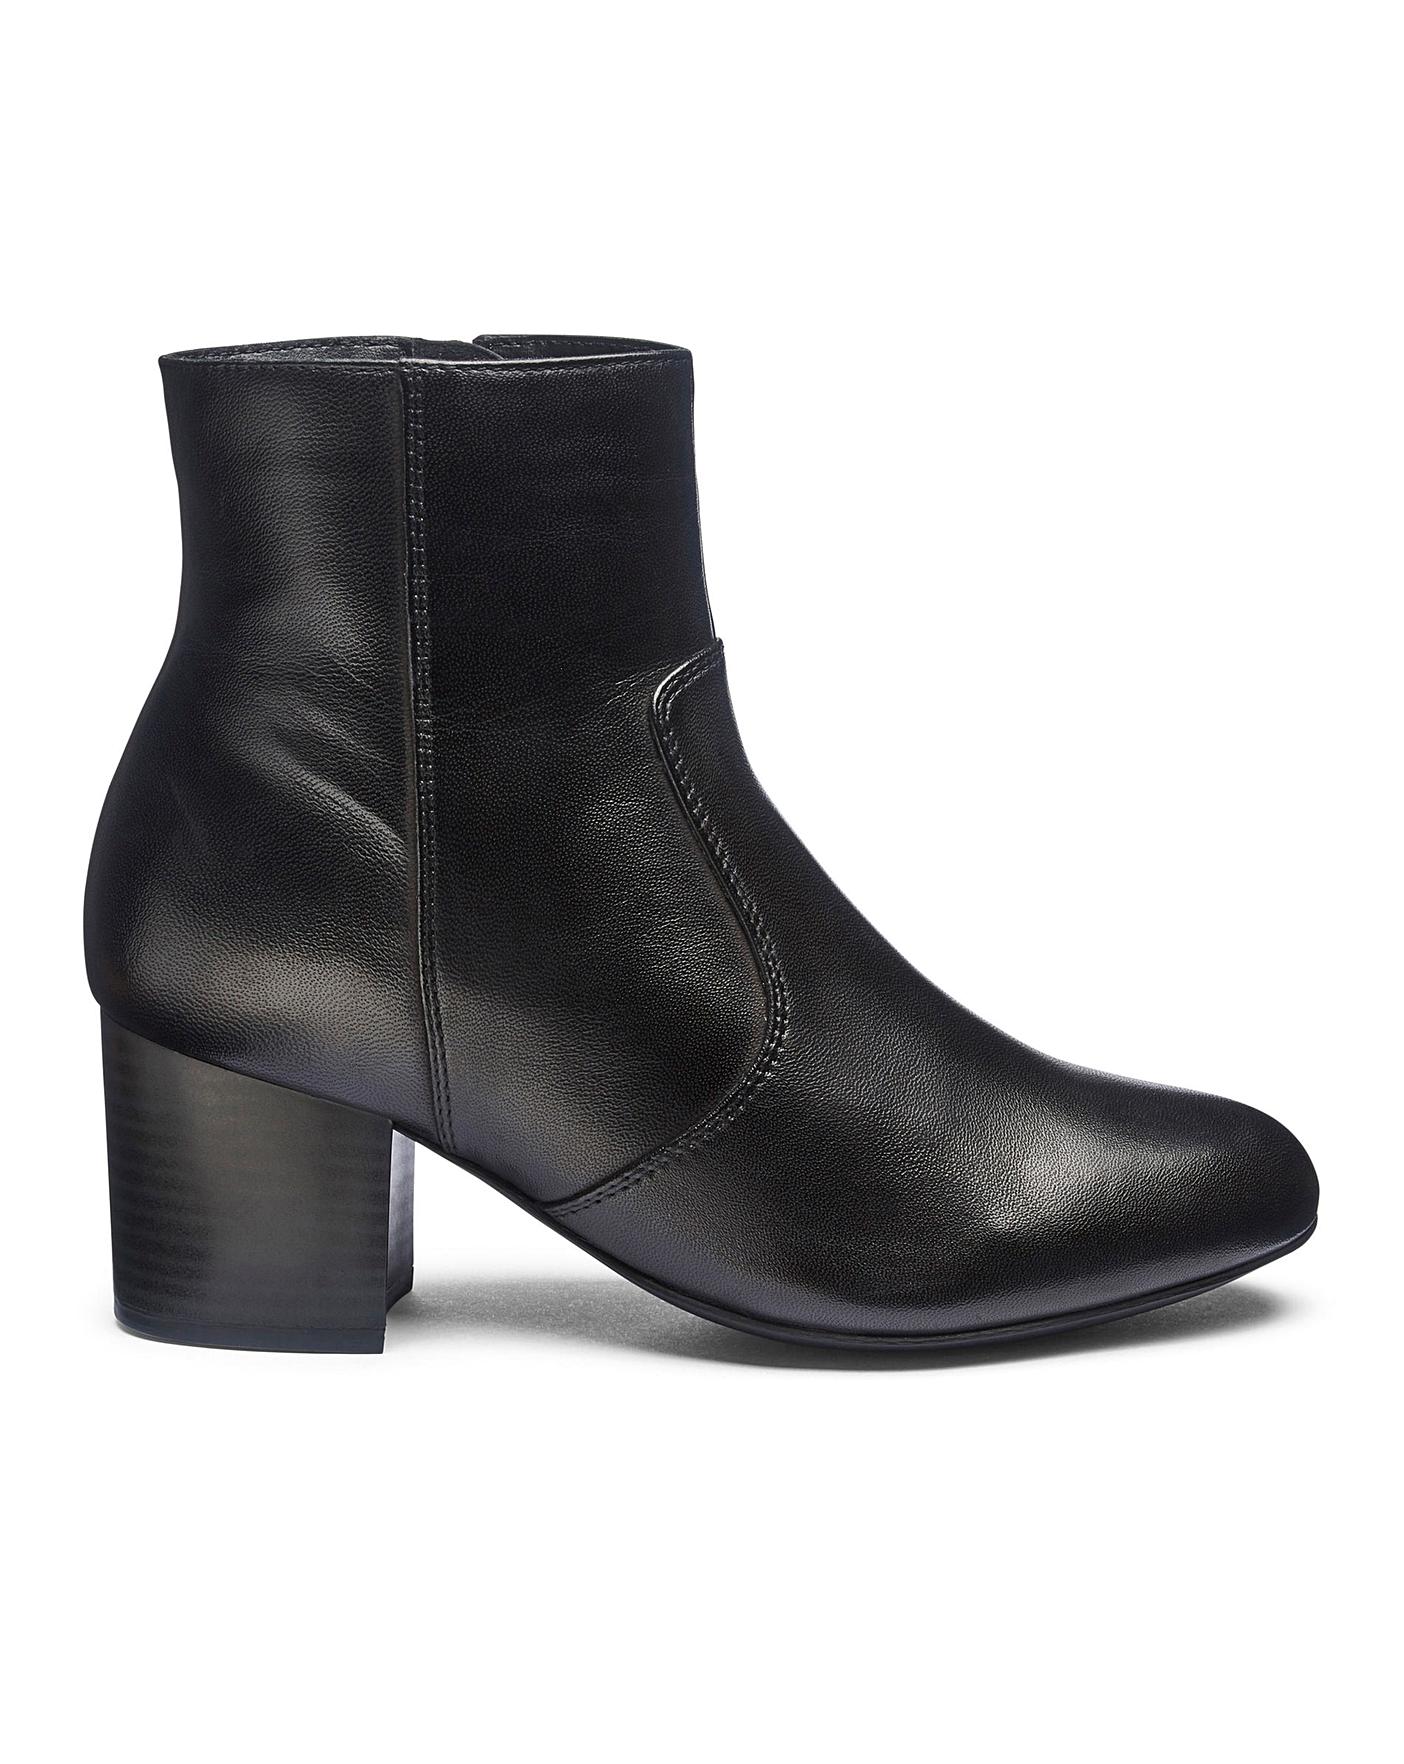 eee ankle boots uk